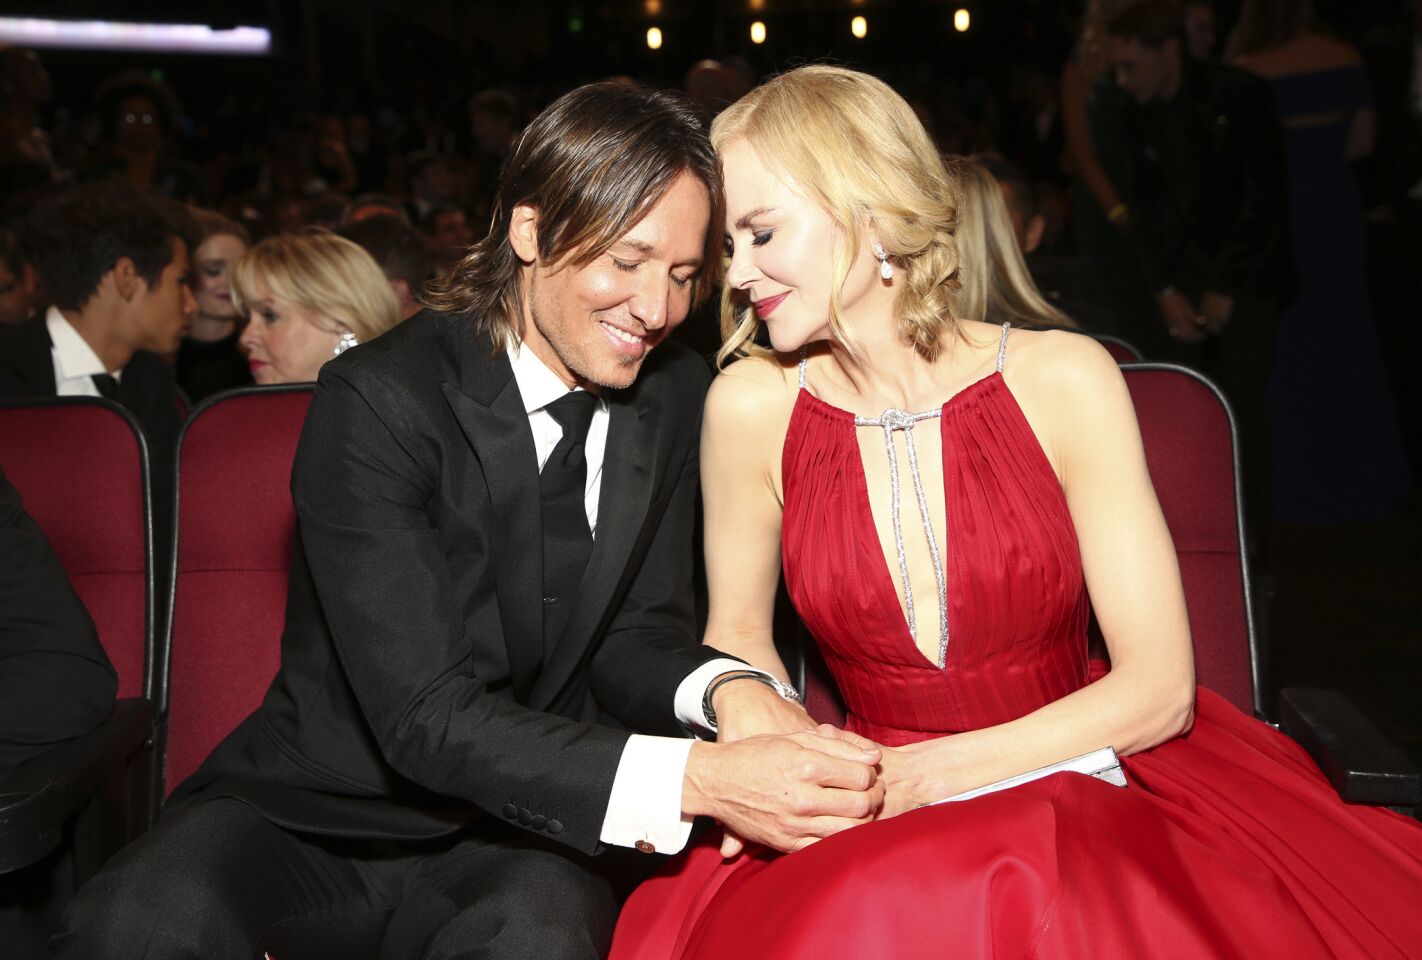 Keith Urban and Nicole Kidman in the audience at the 69th Emmy Awards.